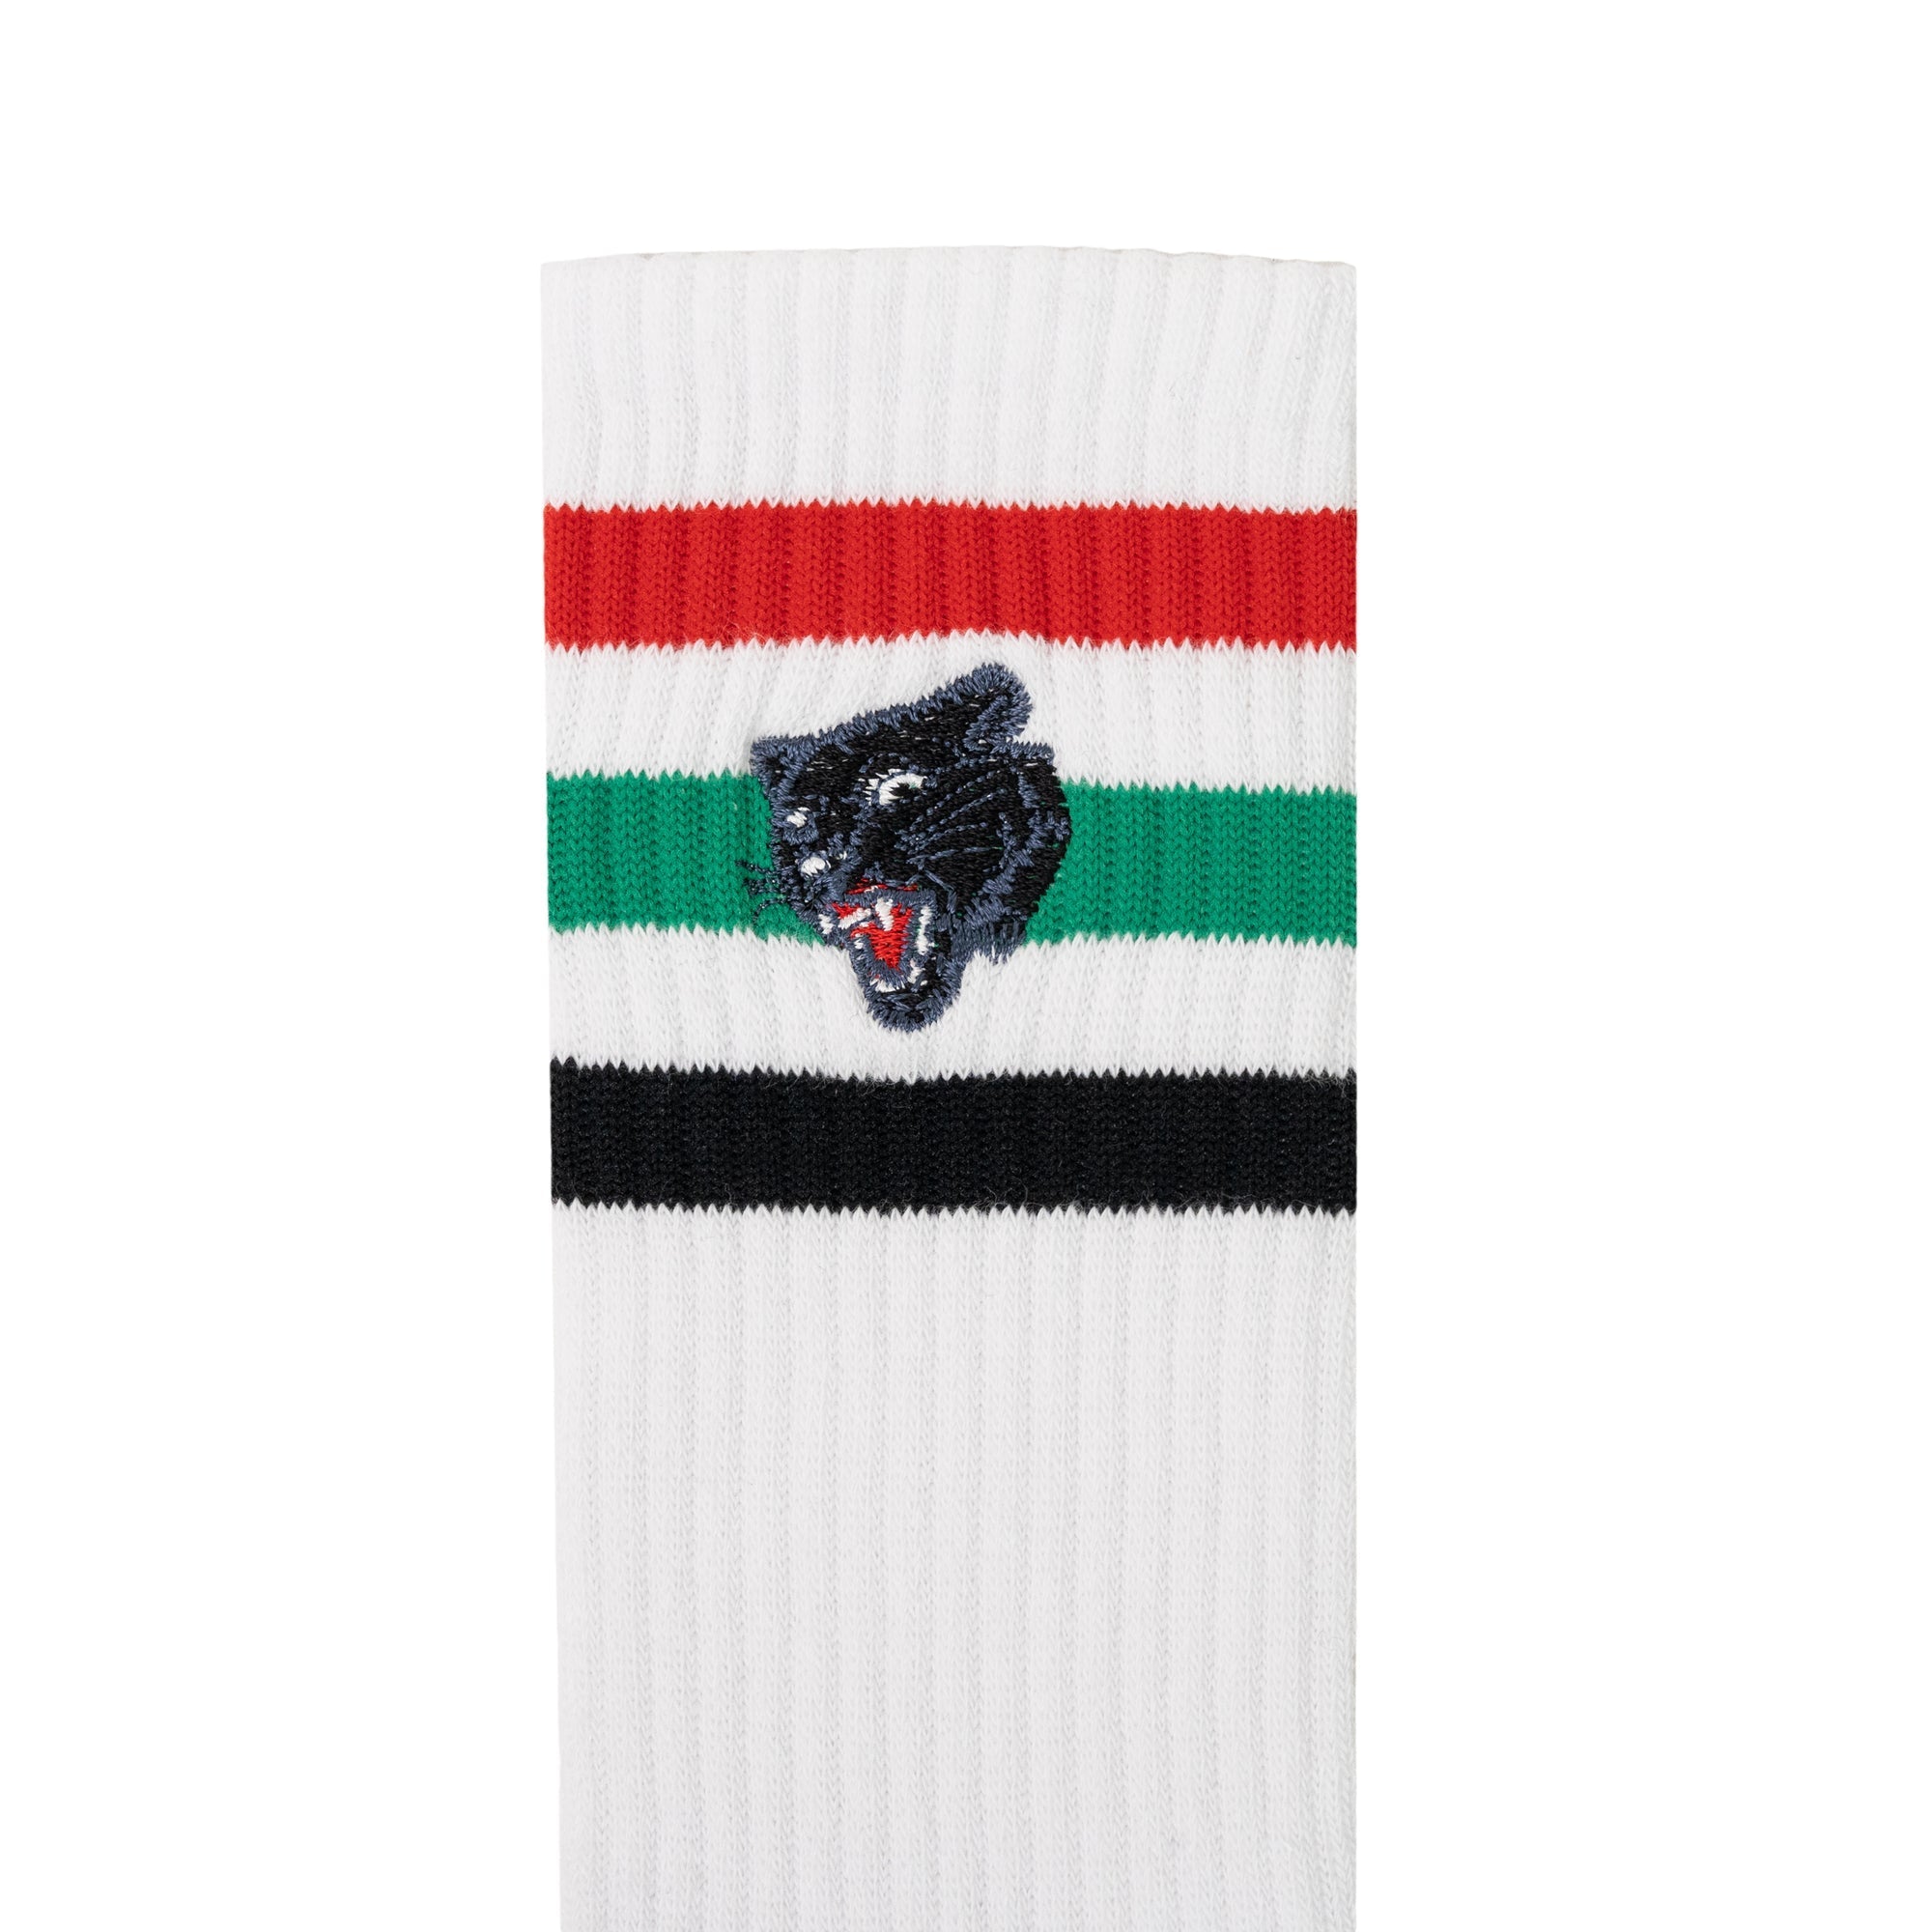 Hardies Hardware - Embroidered Panther Striped Sock